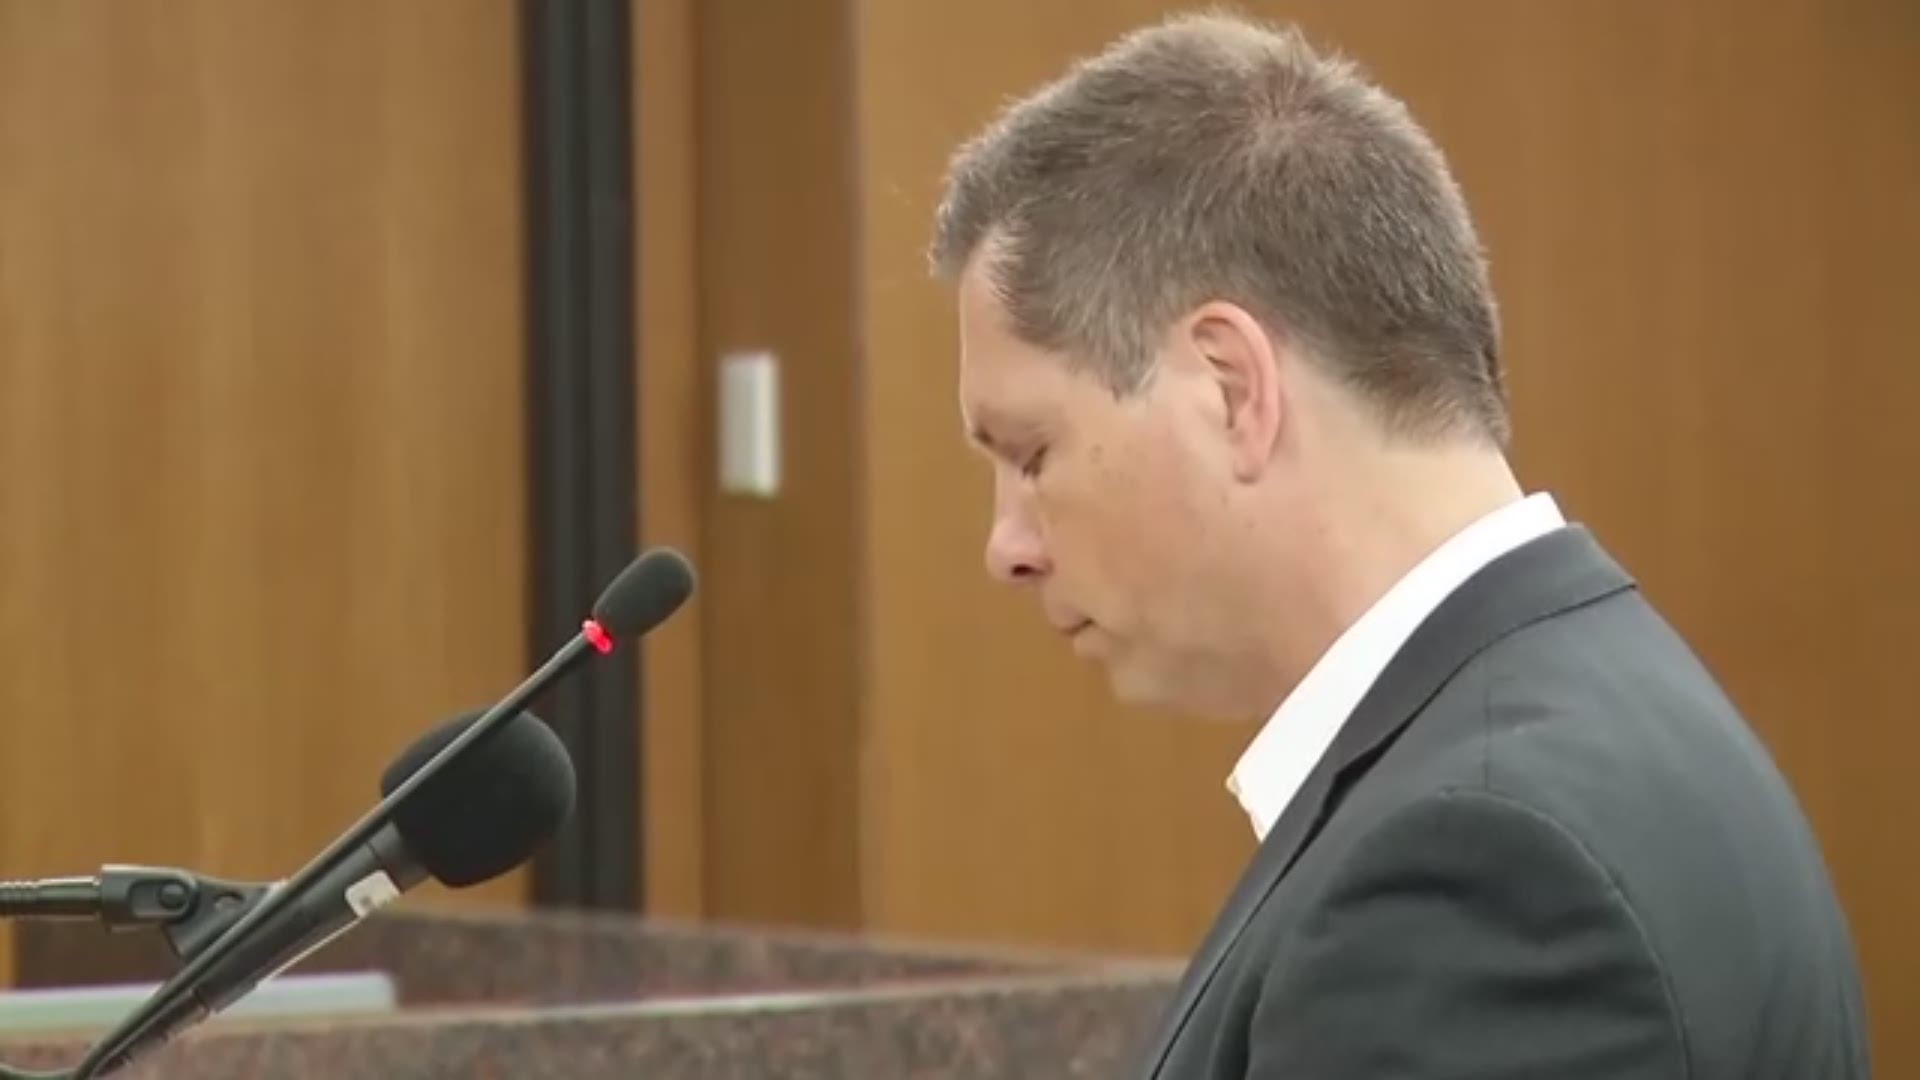 A jury found the former Minneapolis police officer guilty of third degree murder and manslaughter in the July 2017 shooting.